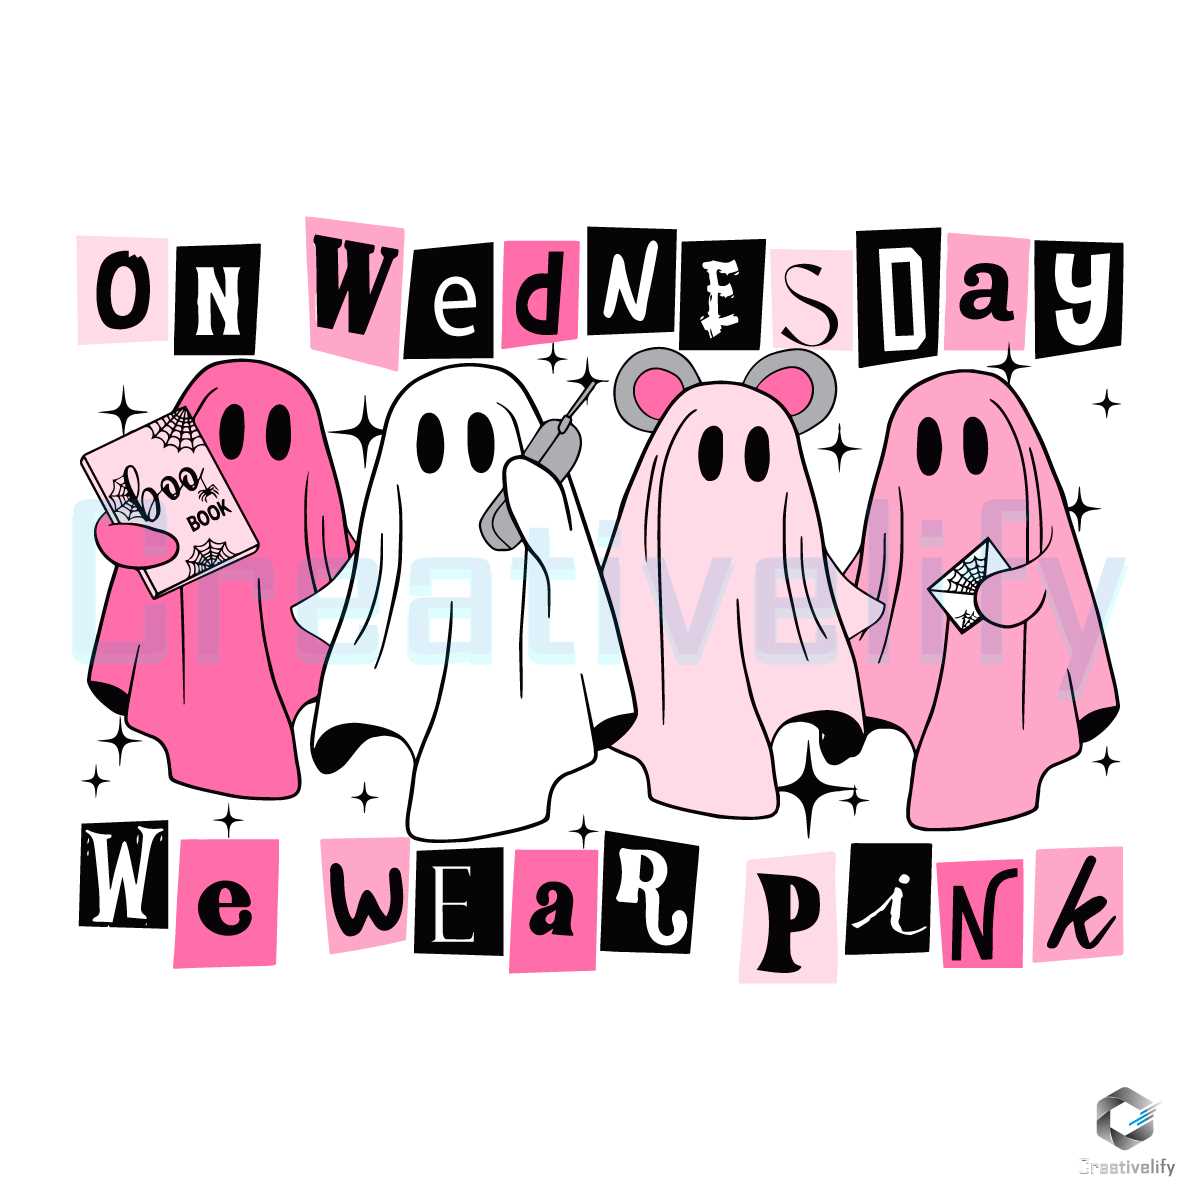 On Wednesday We Wear Pink SVG Mean Girls Ghost File - CreativeLify